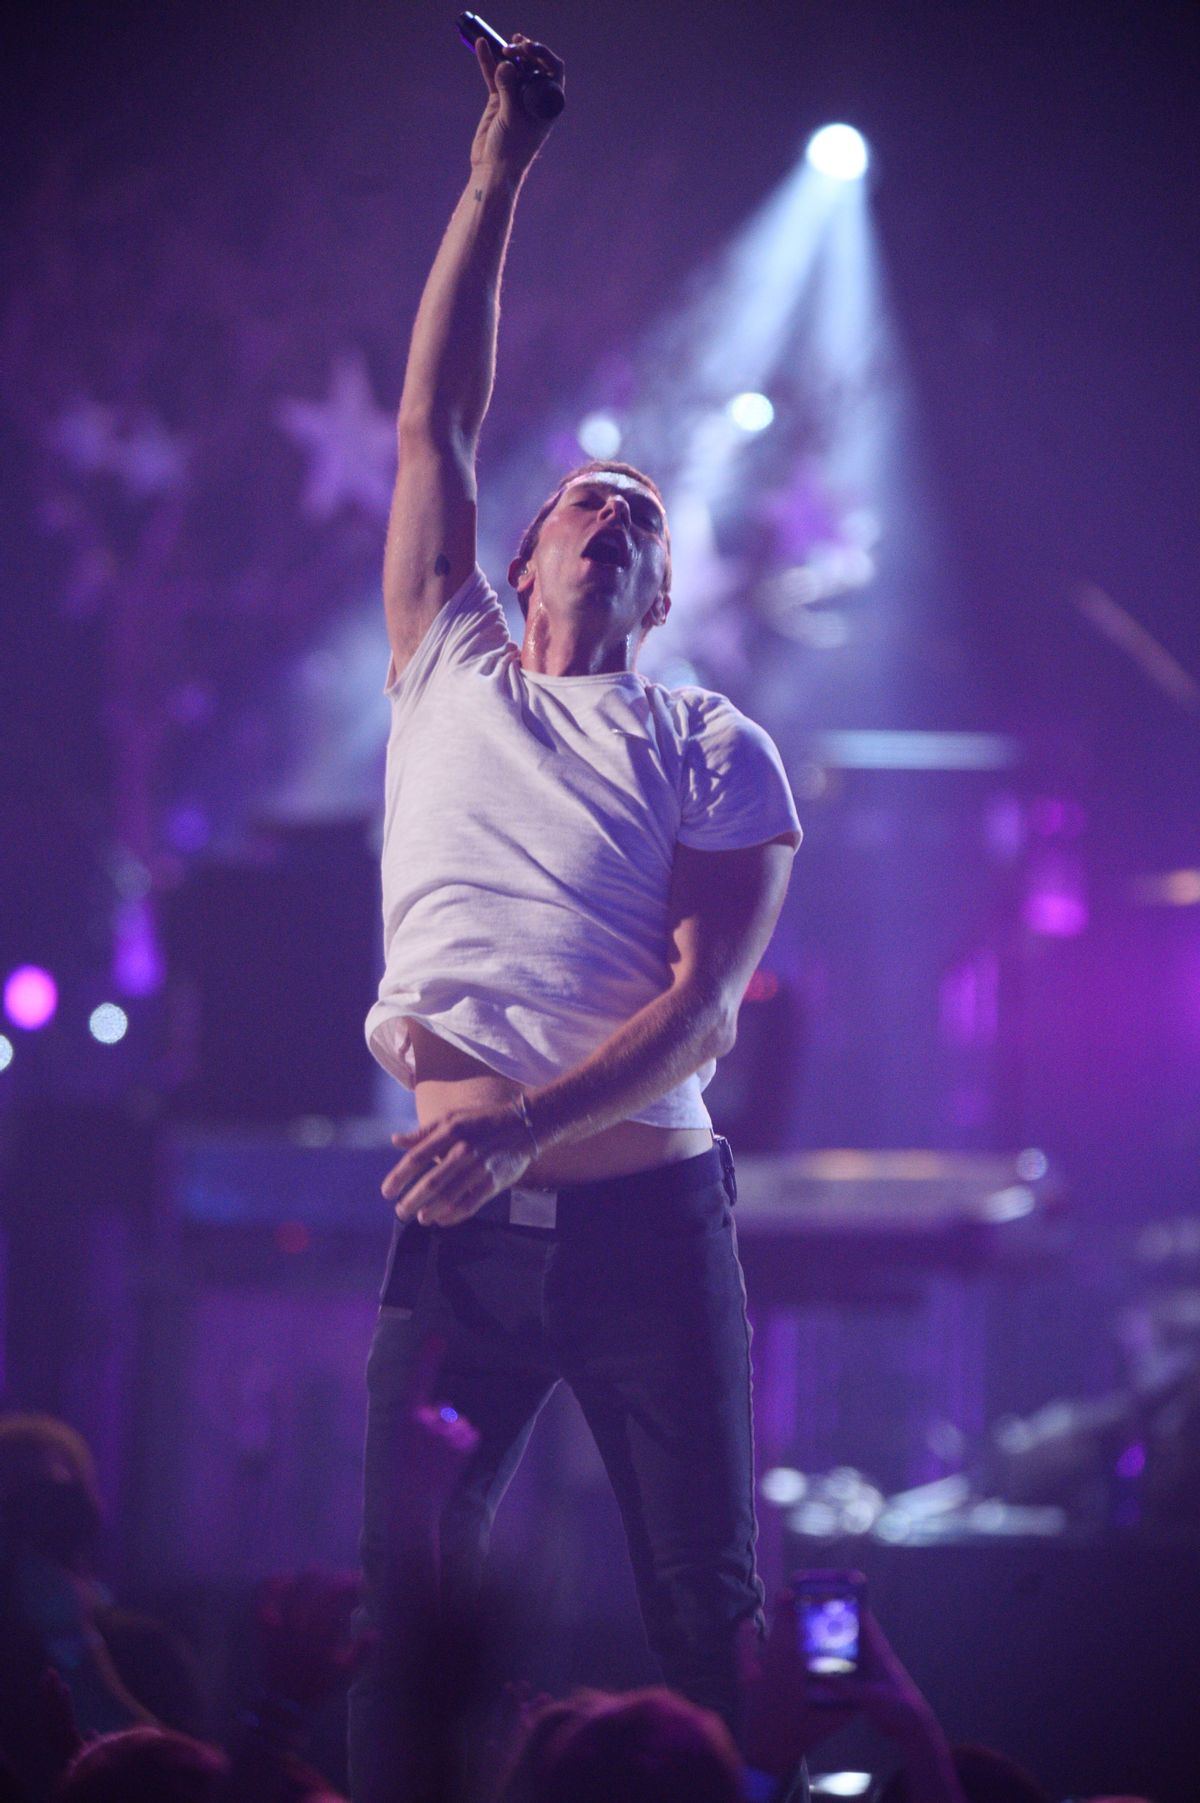 Chris Martin of Coldplay performs at the iHeartRadio Music Festival at the MGM Grand Garden Arena on Sept. 19, 2014 in Las Vegas, Nevada. (Photo by Al Powers/Powers Imagery/Invision/AP) (Powers Imagery/invision/ap)